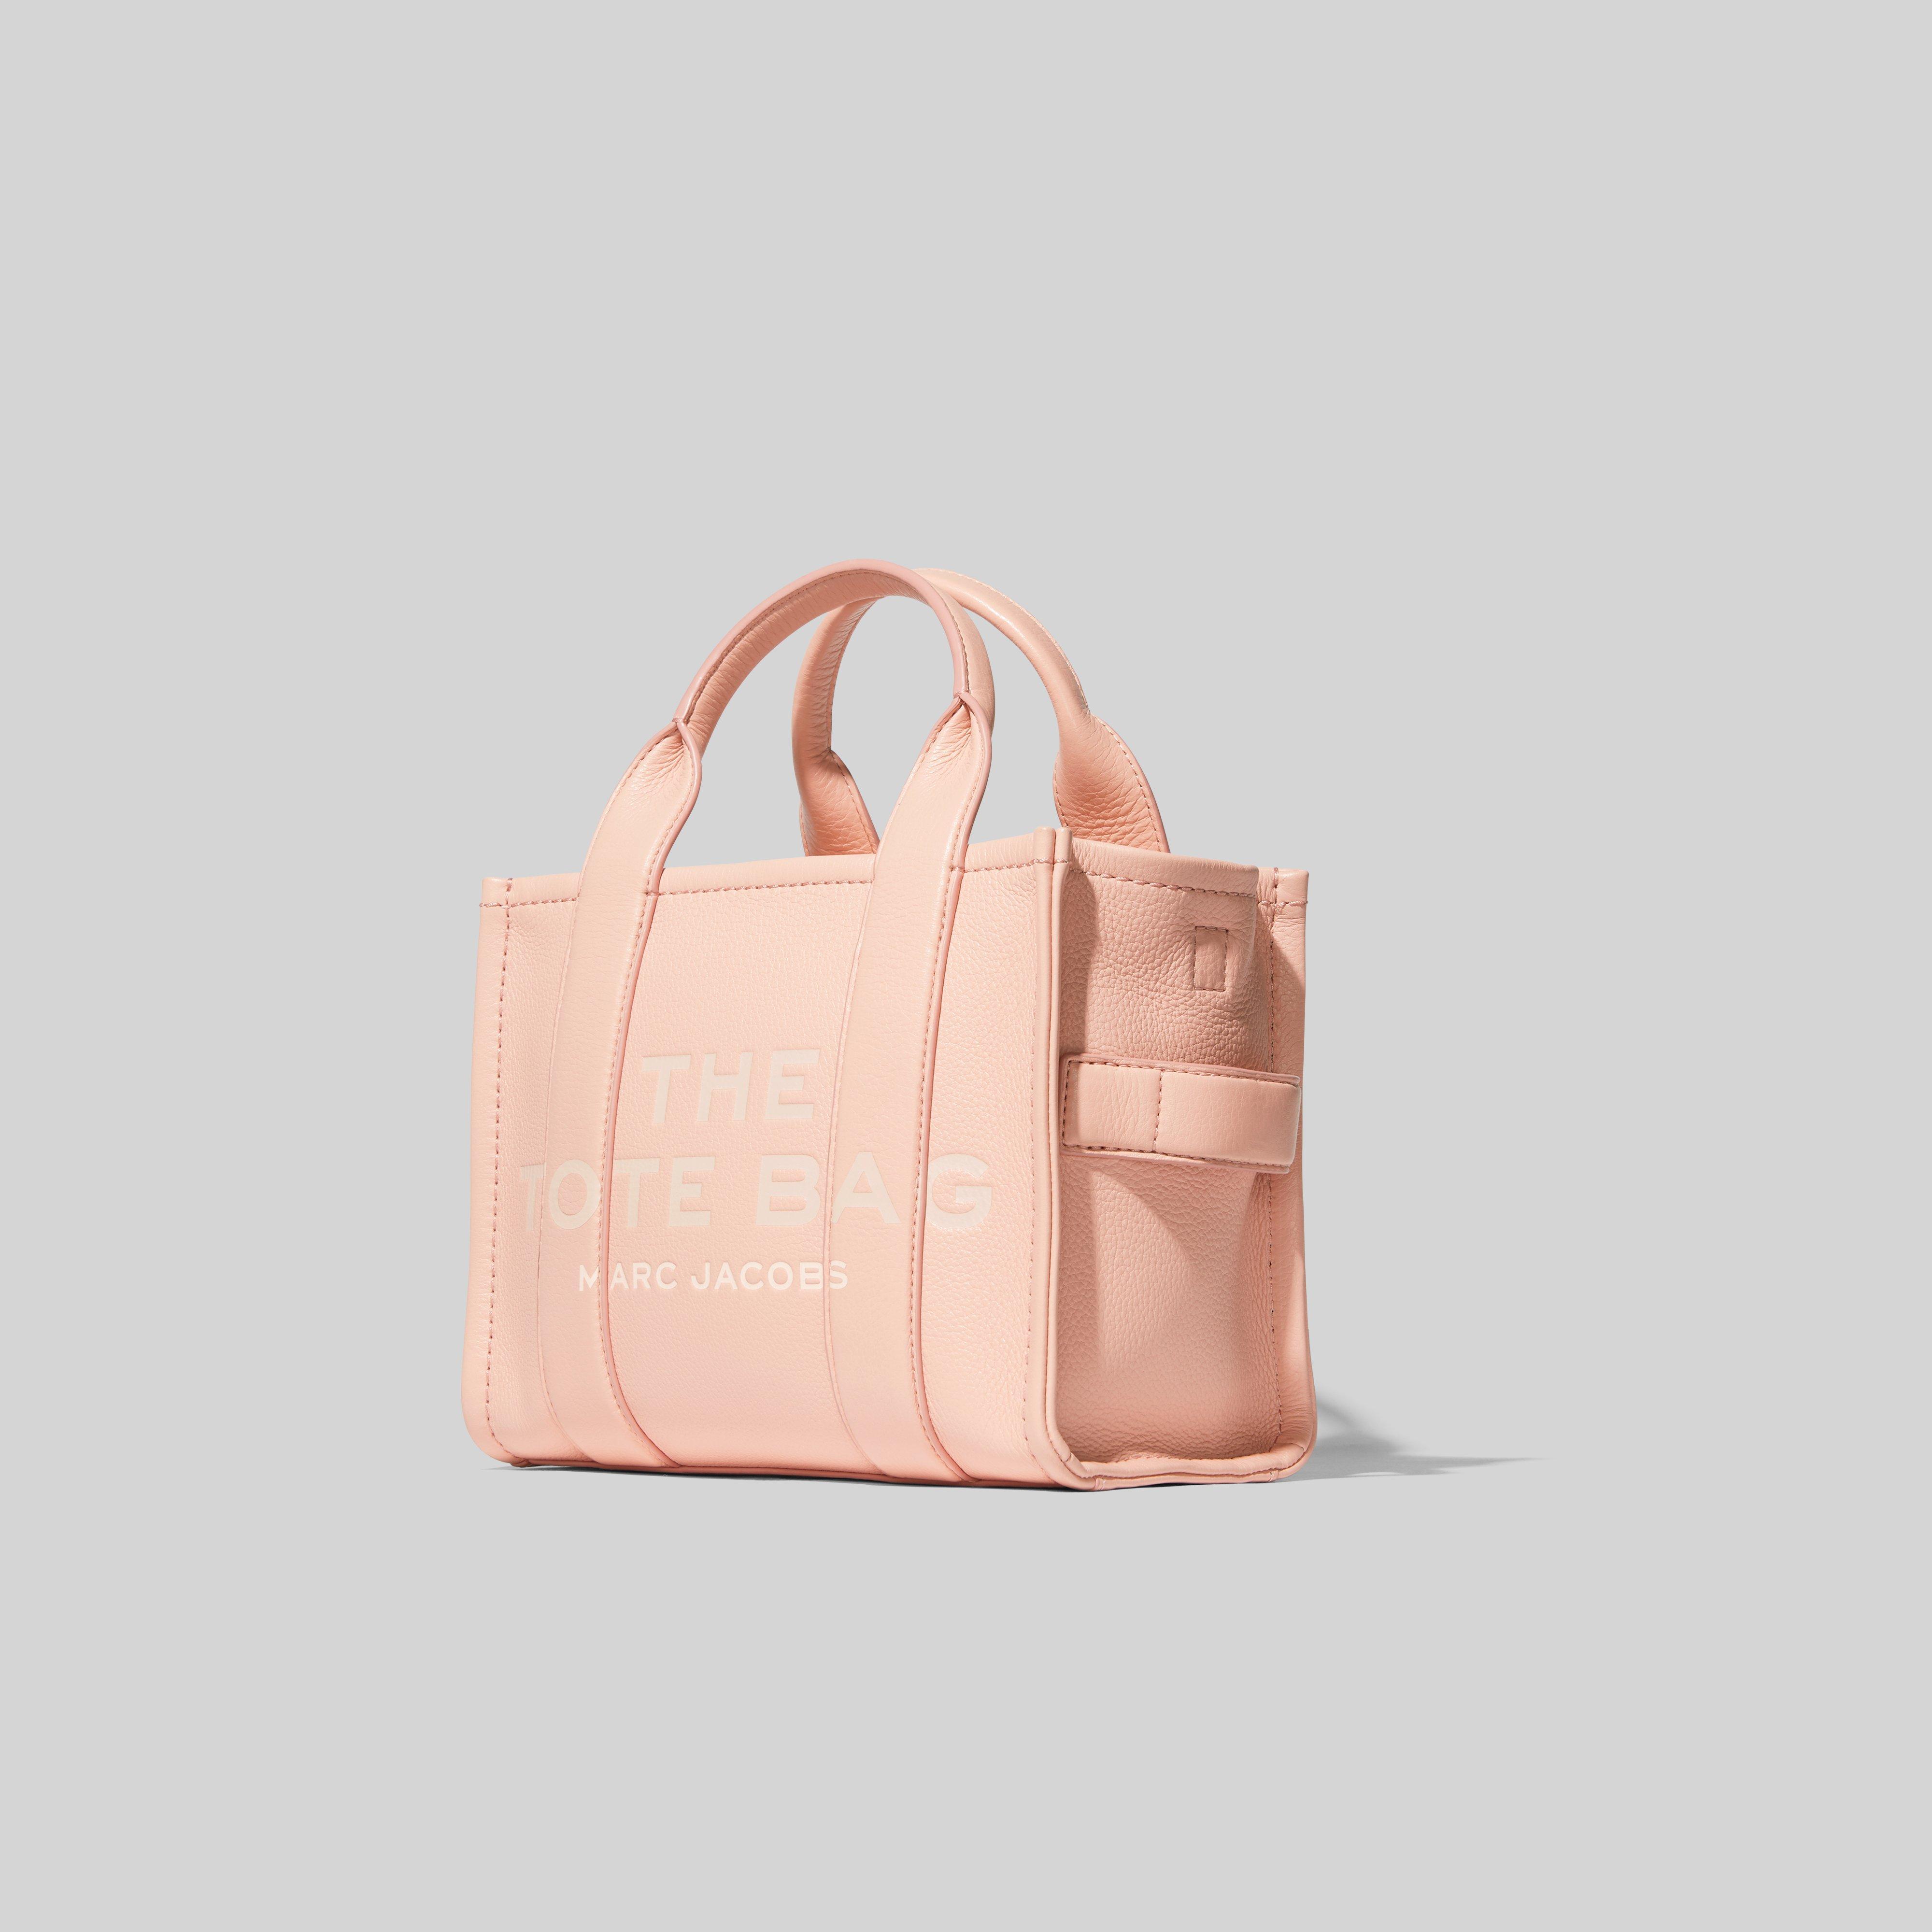 Marc Jacobs The Leather Mini Traveler Tote Bag in Pink - Lyst